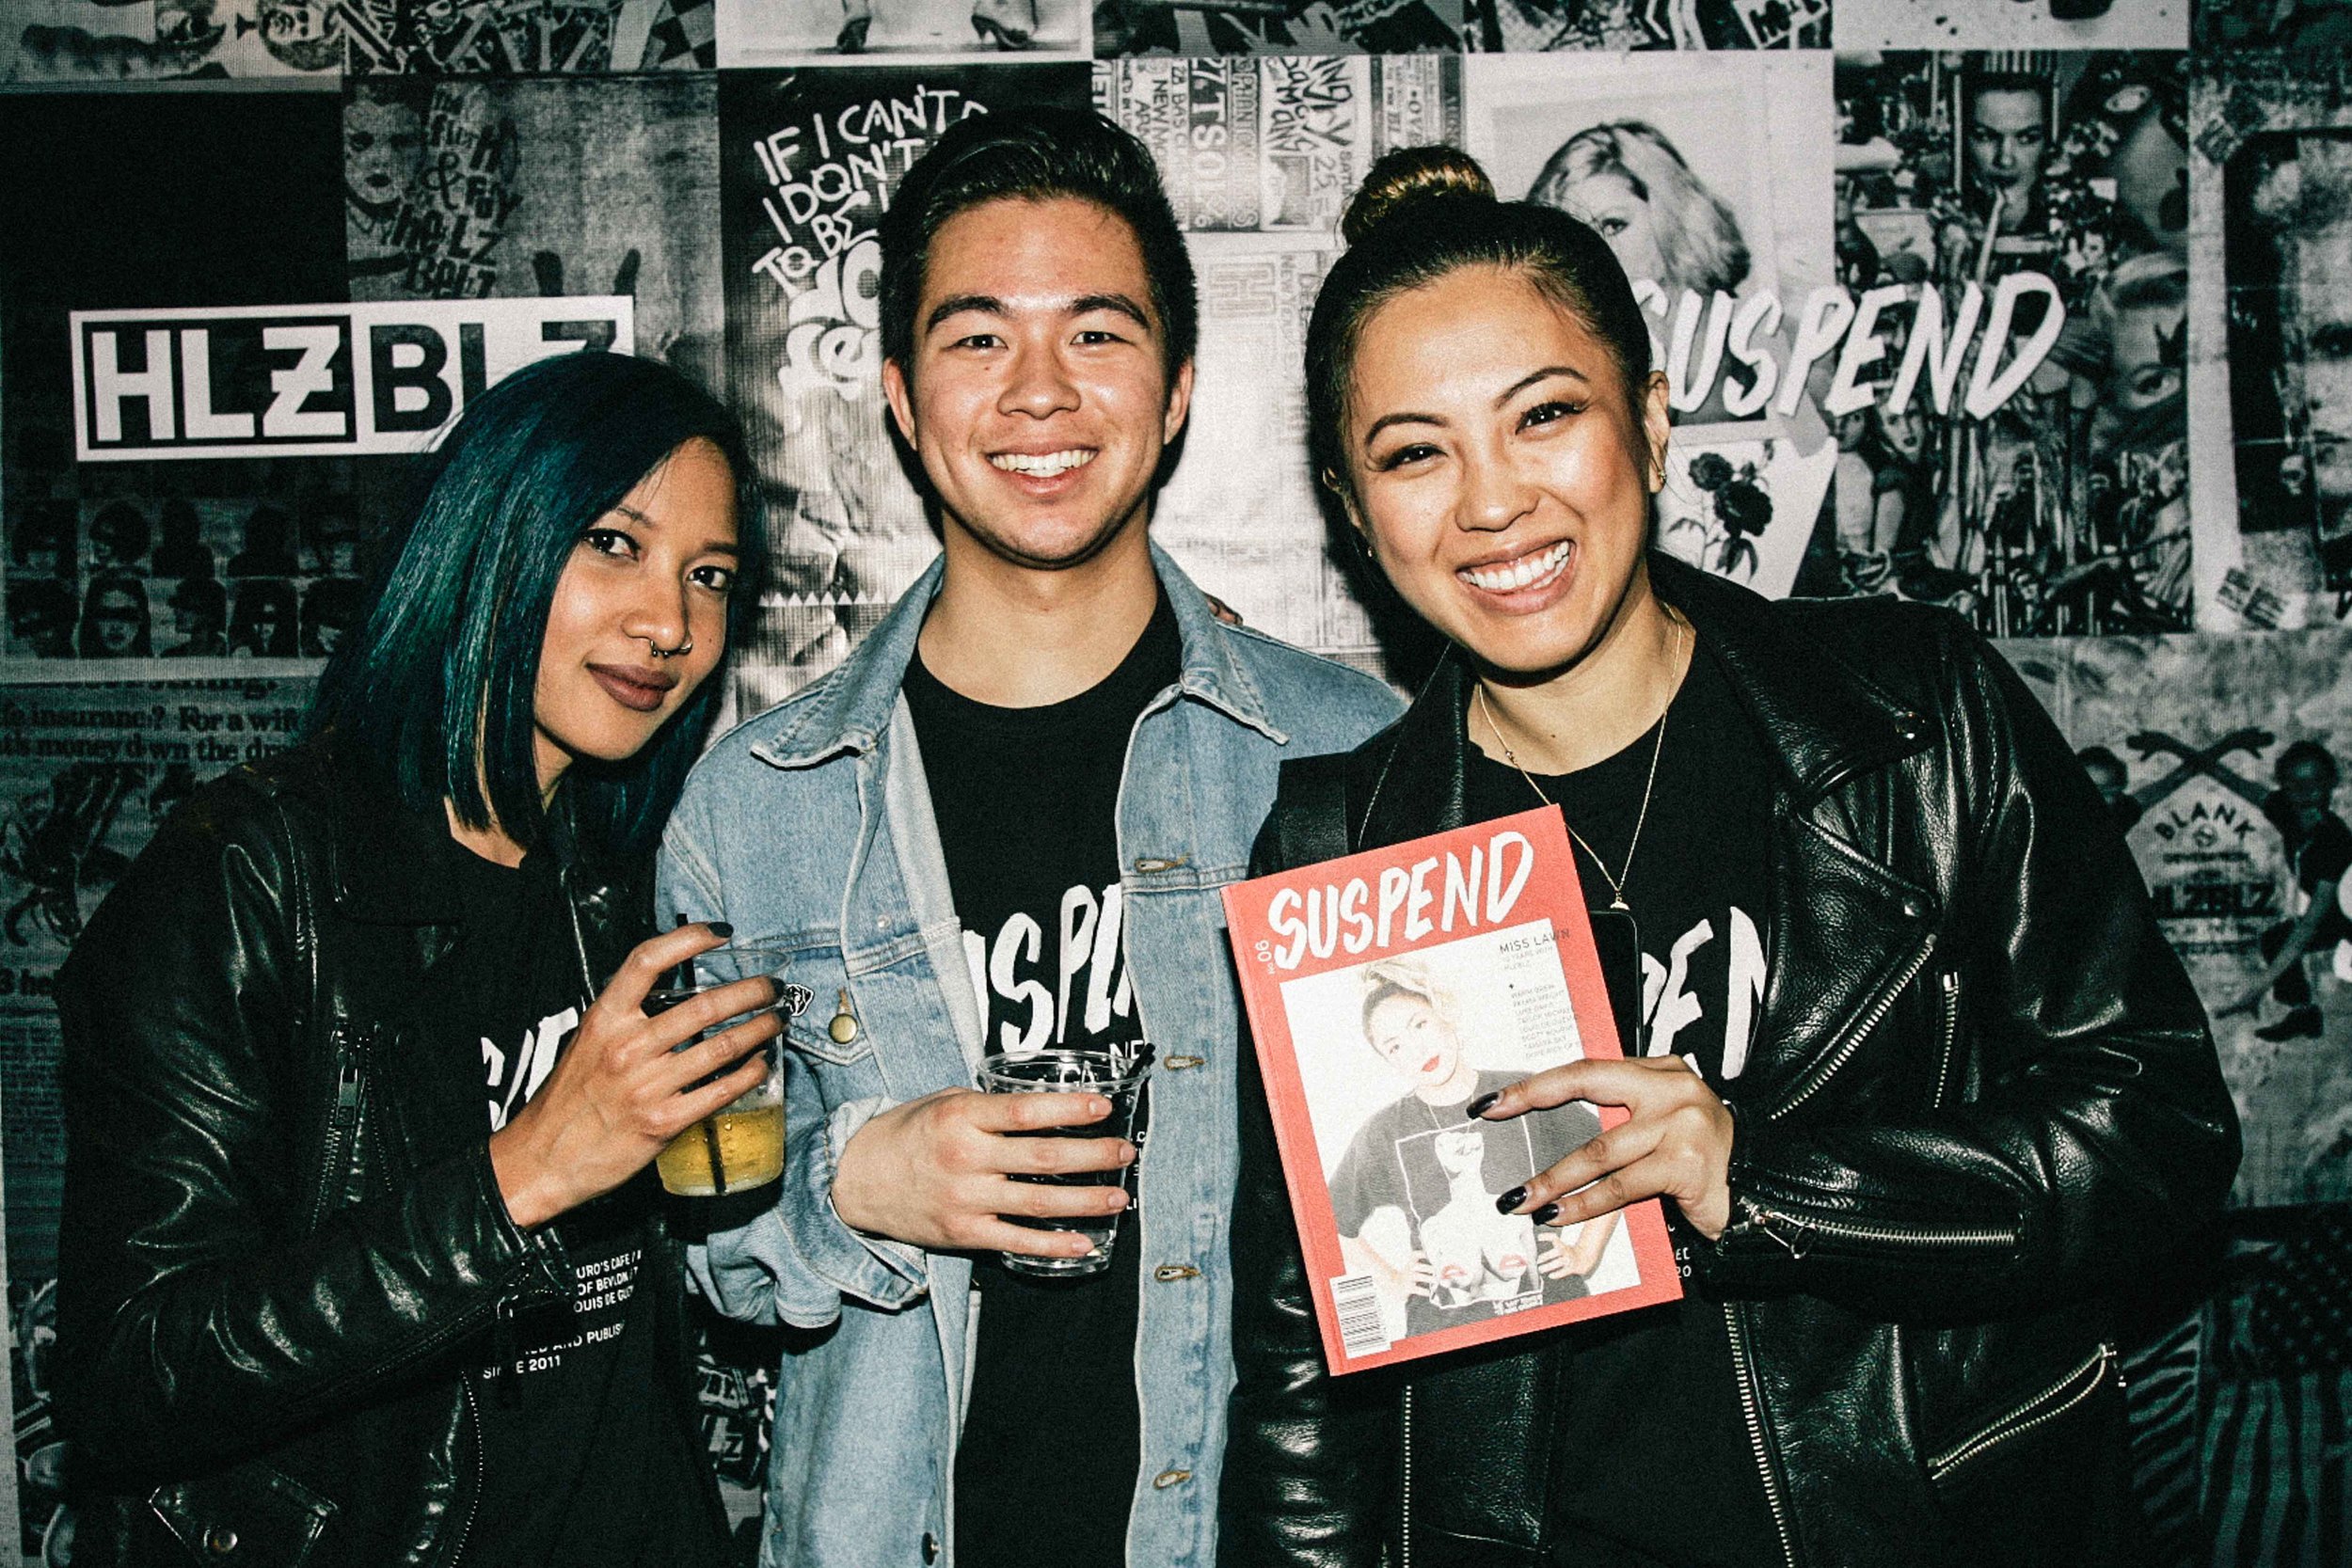  Leslie Corpuz, Brennan de Aguirre, and EIC Diane Abapo at the ISSUE 06 Release Party x 10YR HLZBLZ Anniversary (Feb 11) at Globe Theater. / Photo: © Jonathan Tate for SUSPEND Magazine. 